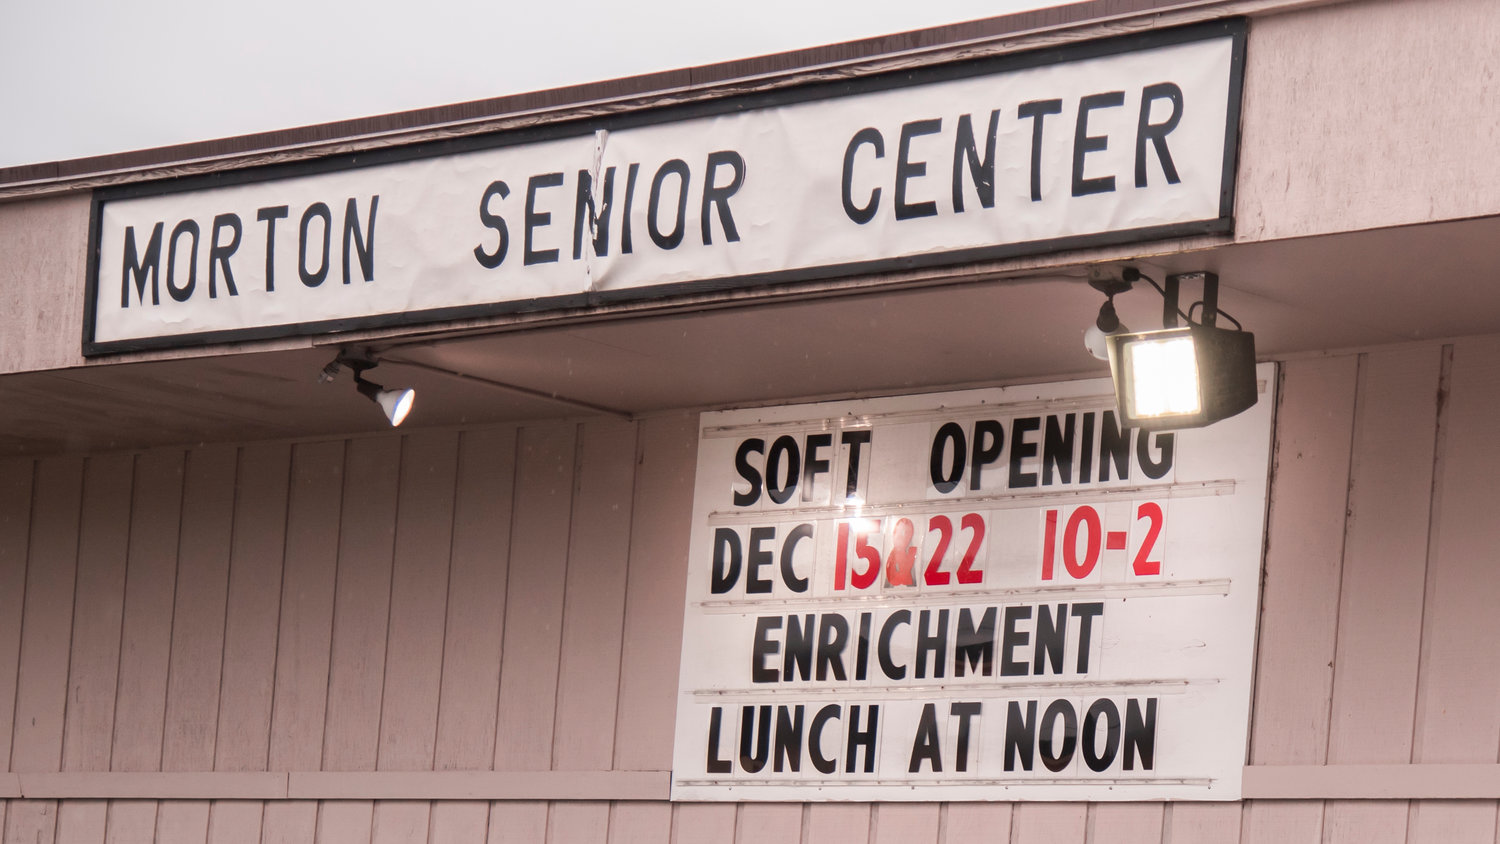 Signage for the Morton Senior Center soft opening is displayed Wednesday afternoon while hosting a lunch.